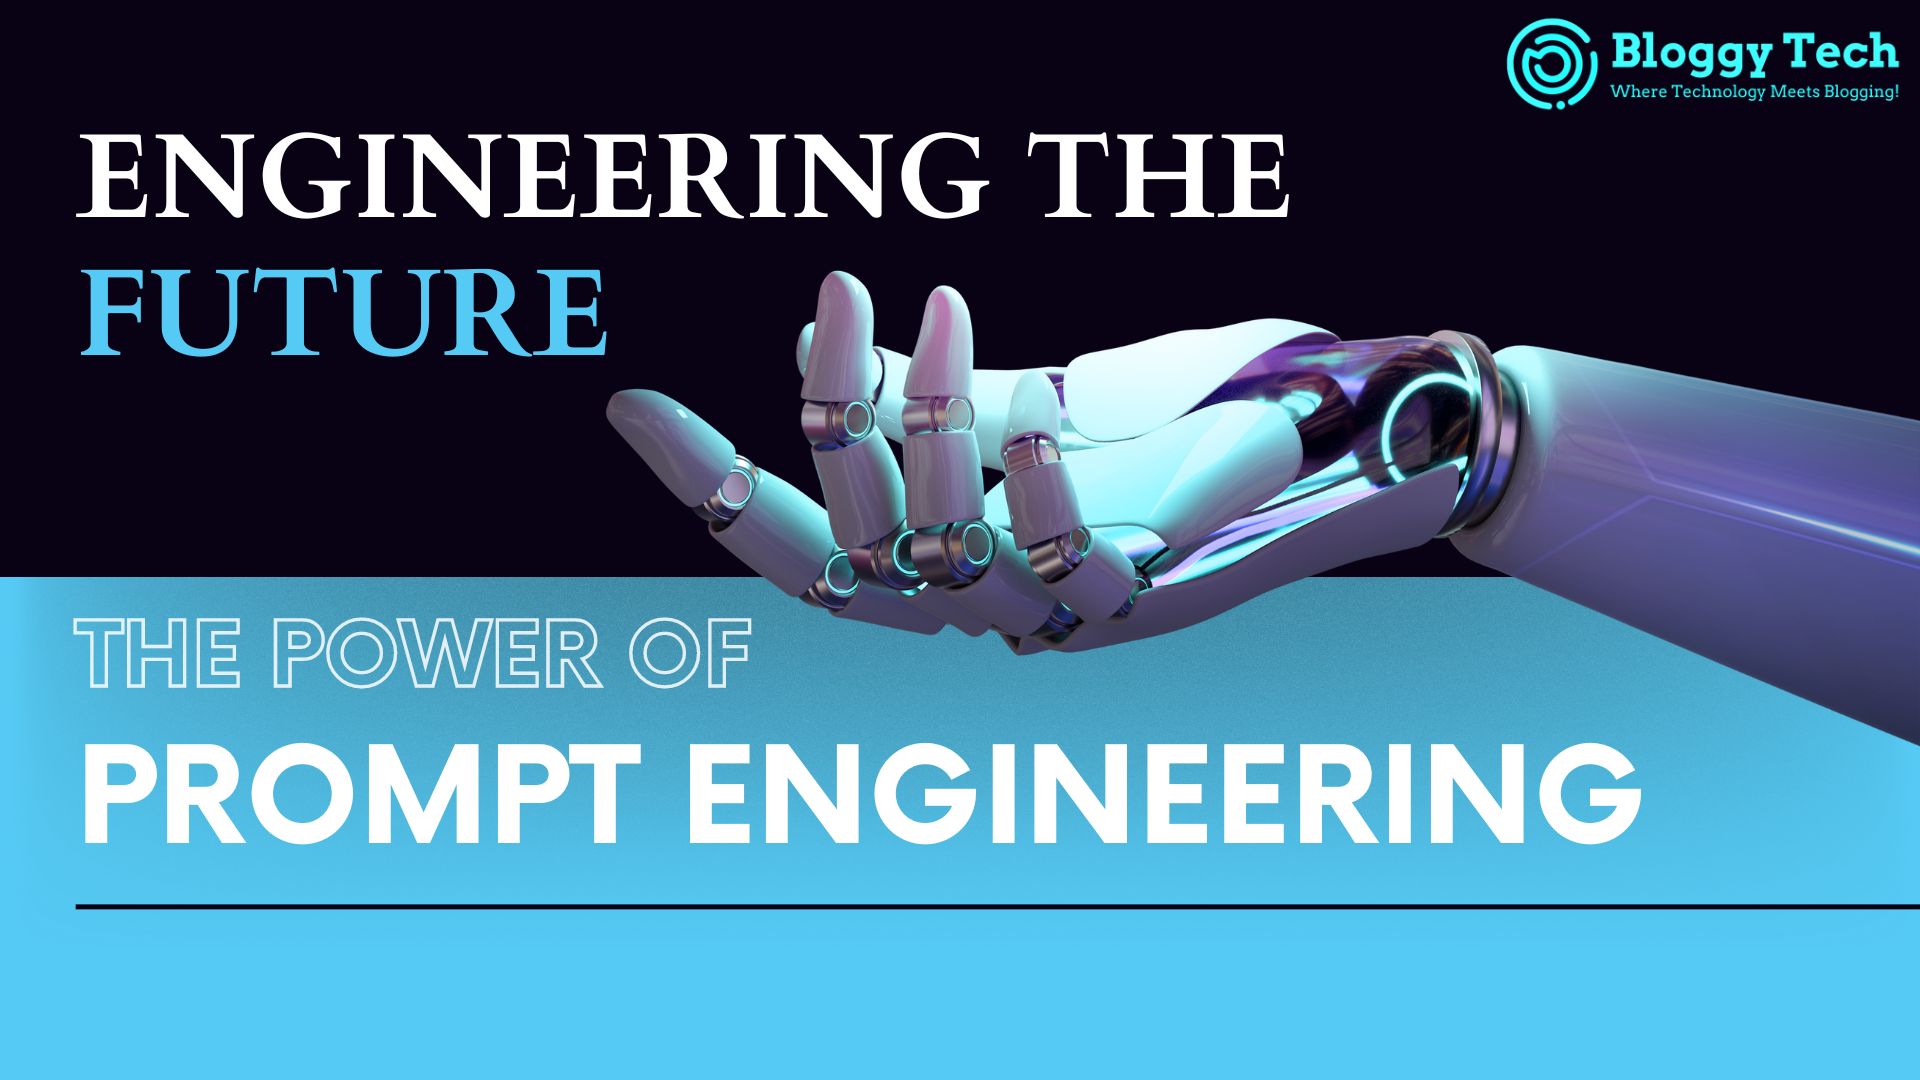 Engineering the Future: The Power of Prompt Engineering